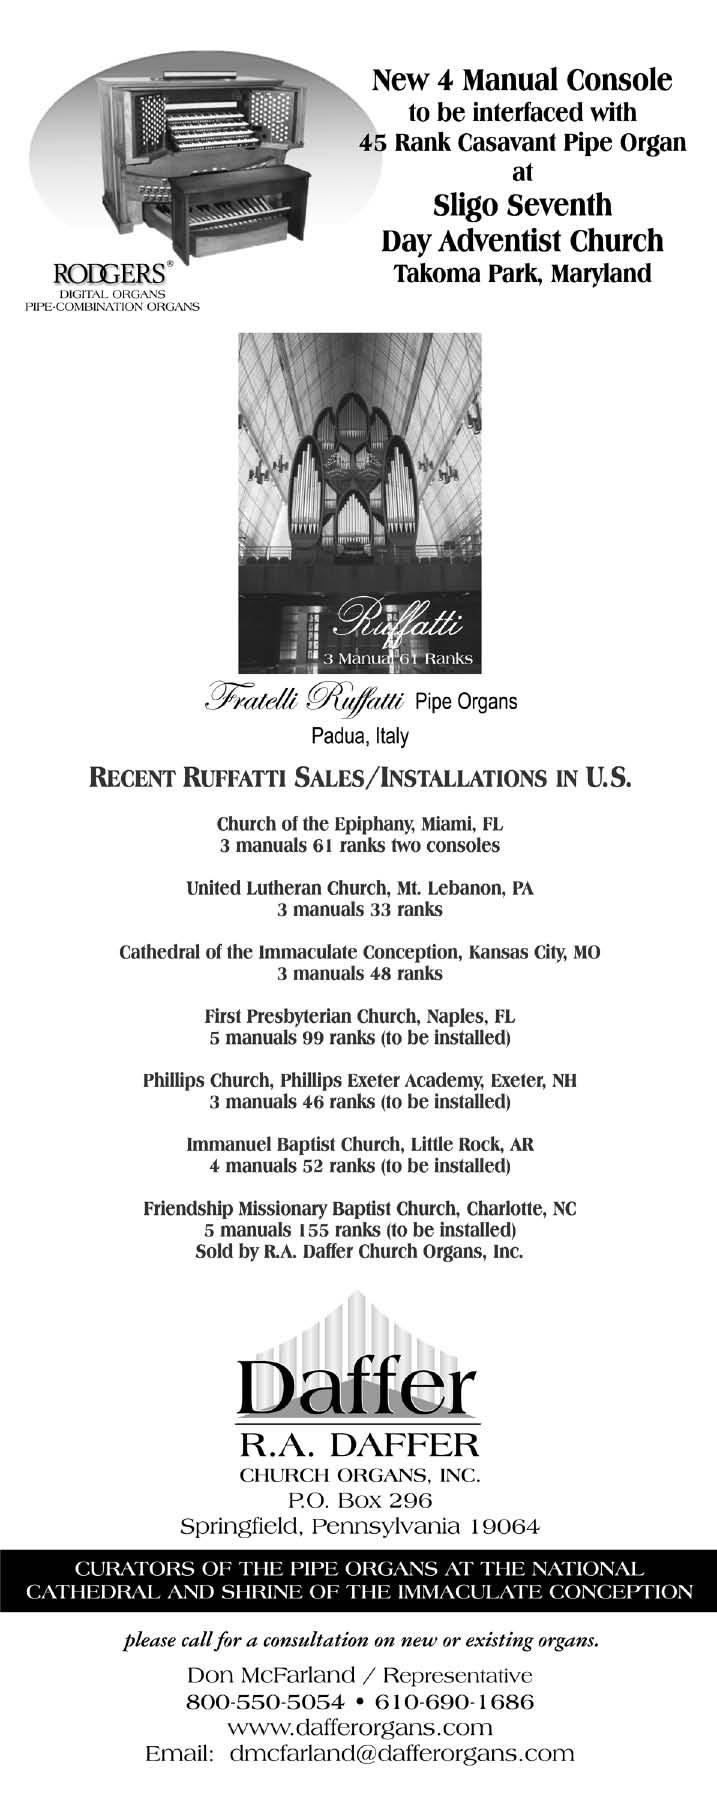 11 TUESDAY NOON RECITALS A N D R E W H E L L E R, C O O R D I N A T O R February Trinity Lutheran Church, 1000 W Main St, Lansdale 3: Eric Gombert 10: Kevin Daly 17: Rev.